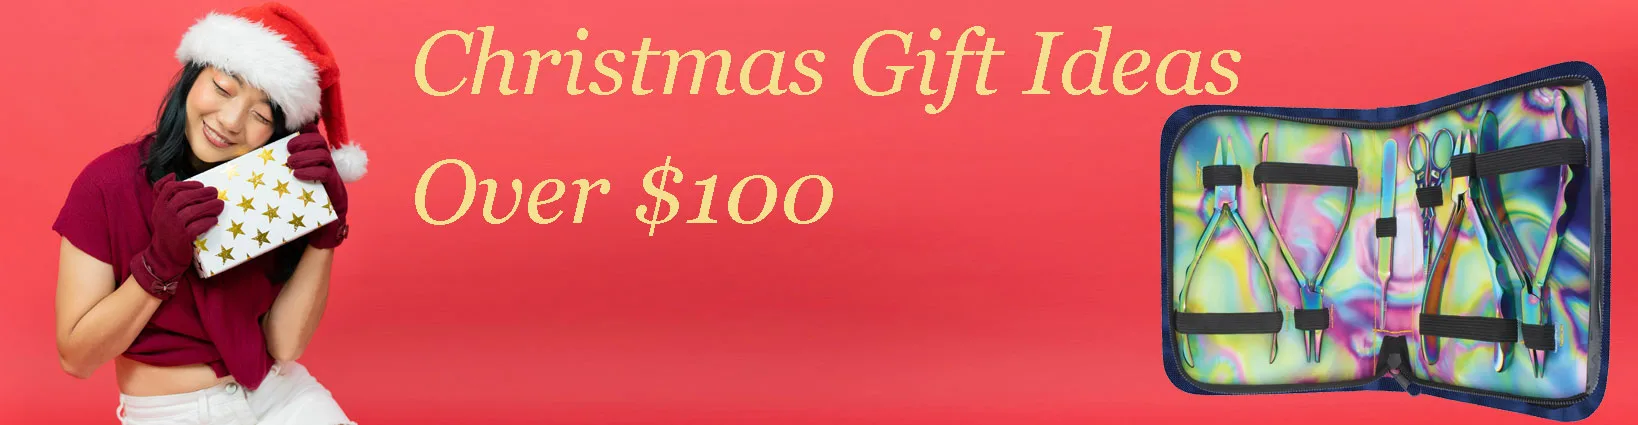 Gifts Over $100